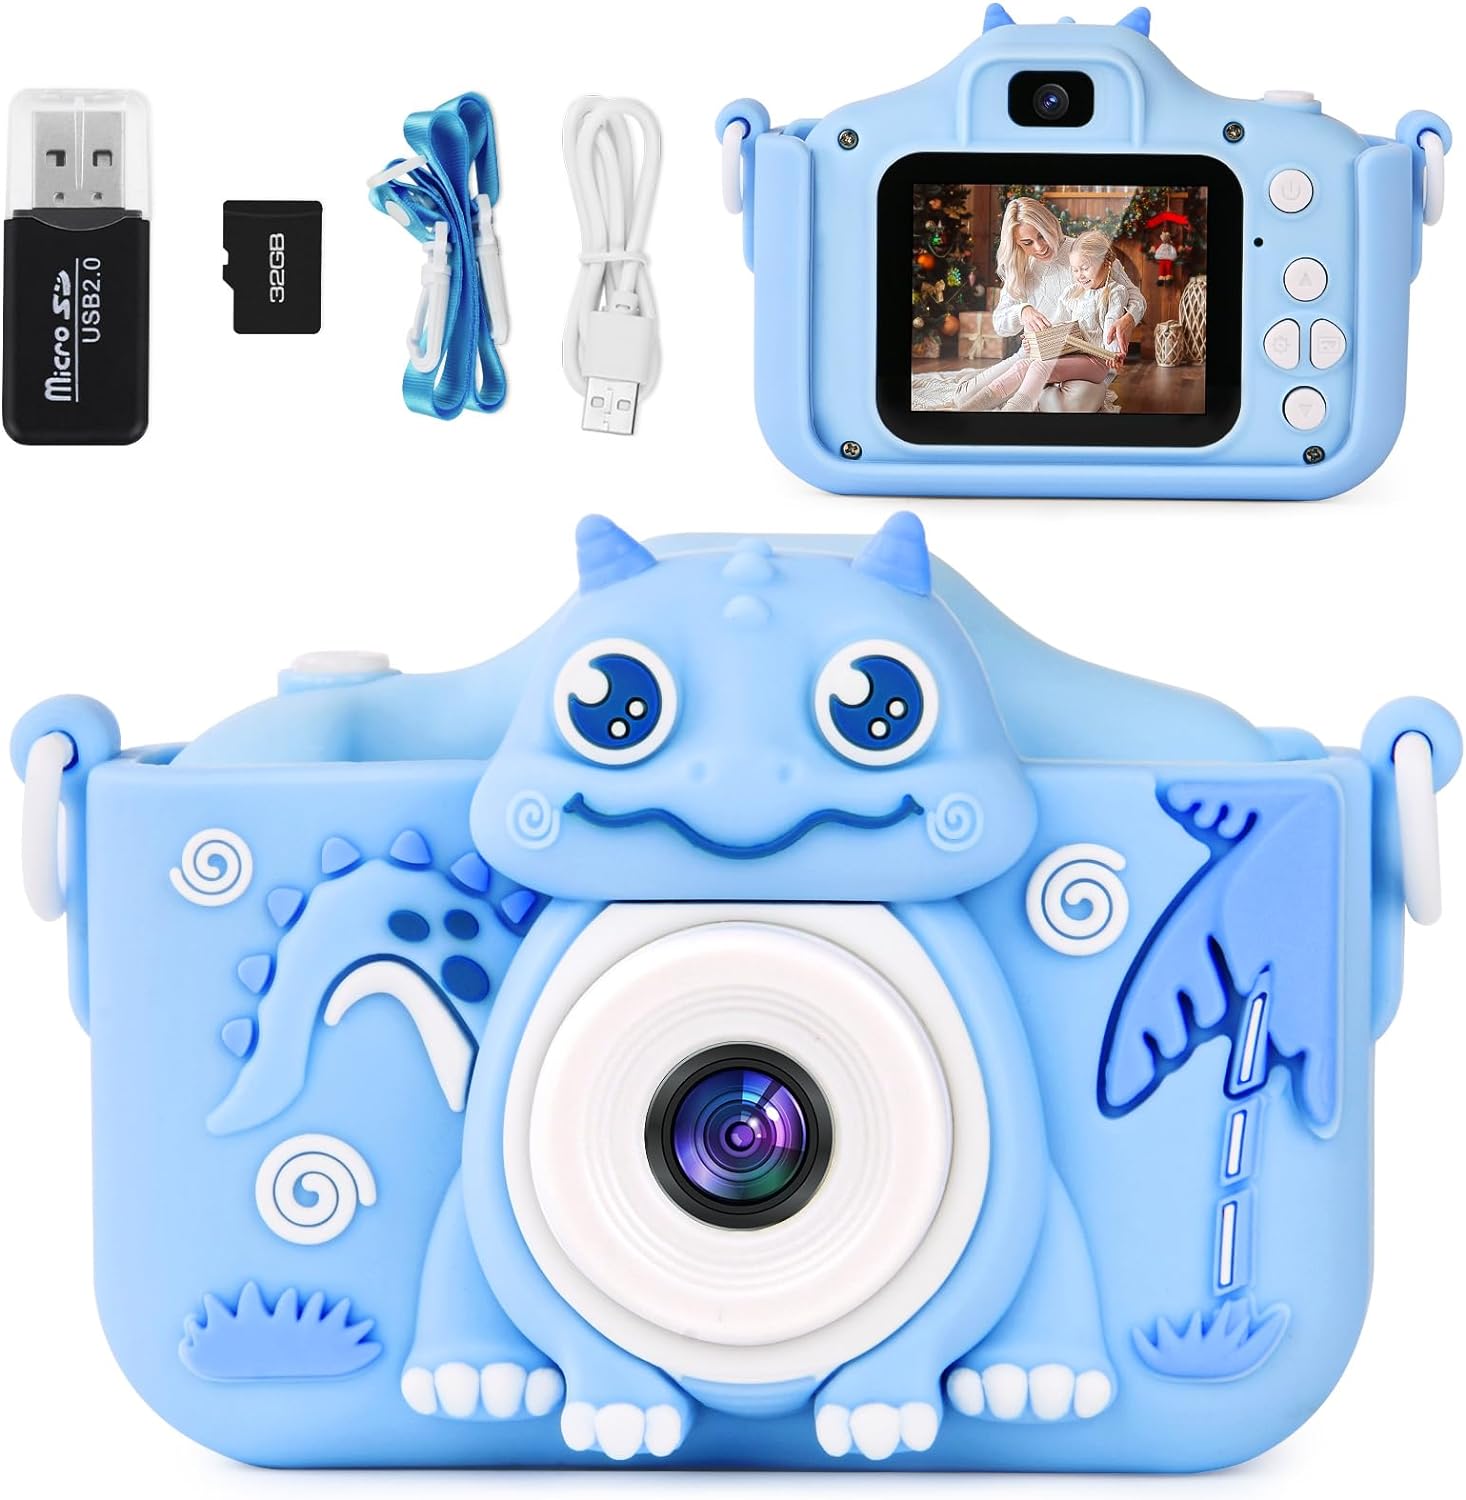 Kids Camera for Boys Age 3-12, Dual Lens Selfie Toddler Camera - Capturing Childhood Adventures in HD! Perfect Gift for Christmas - Includes 32GB Card